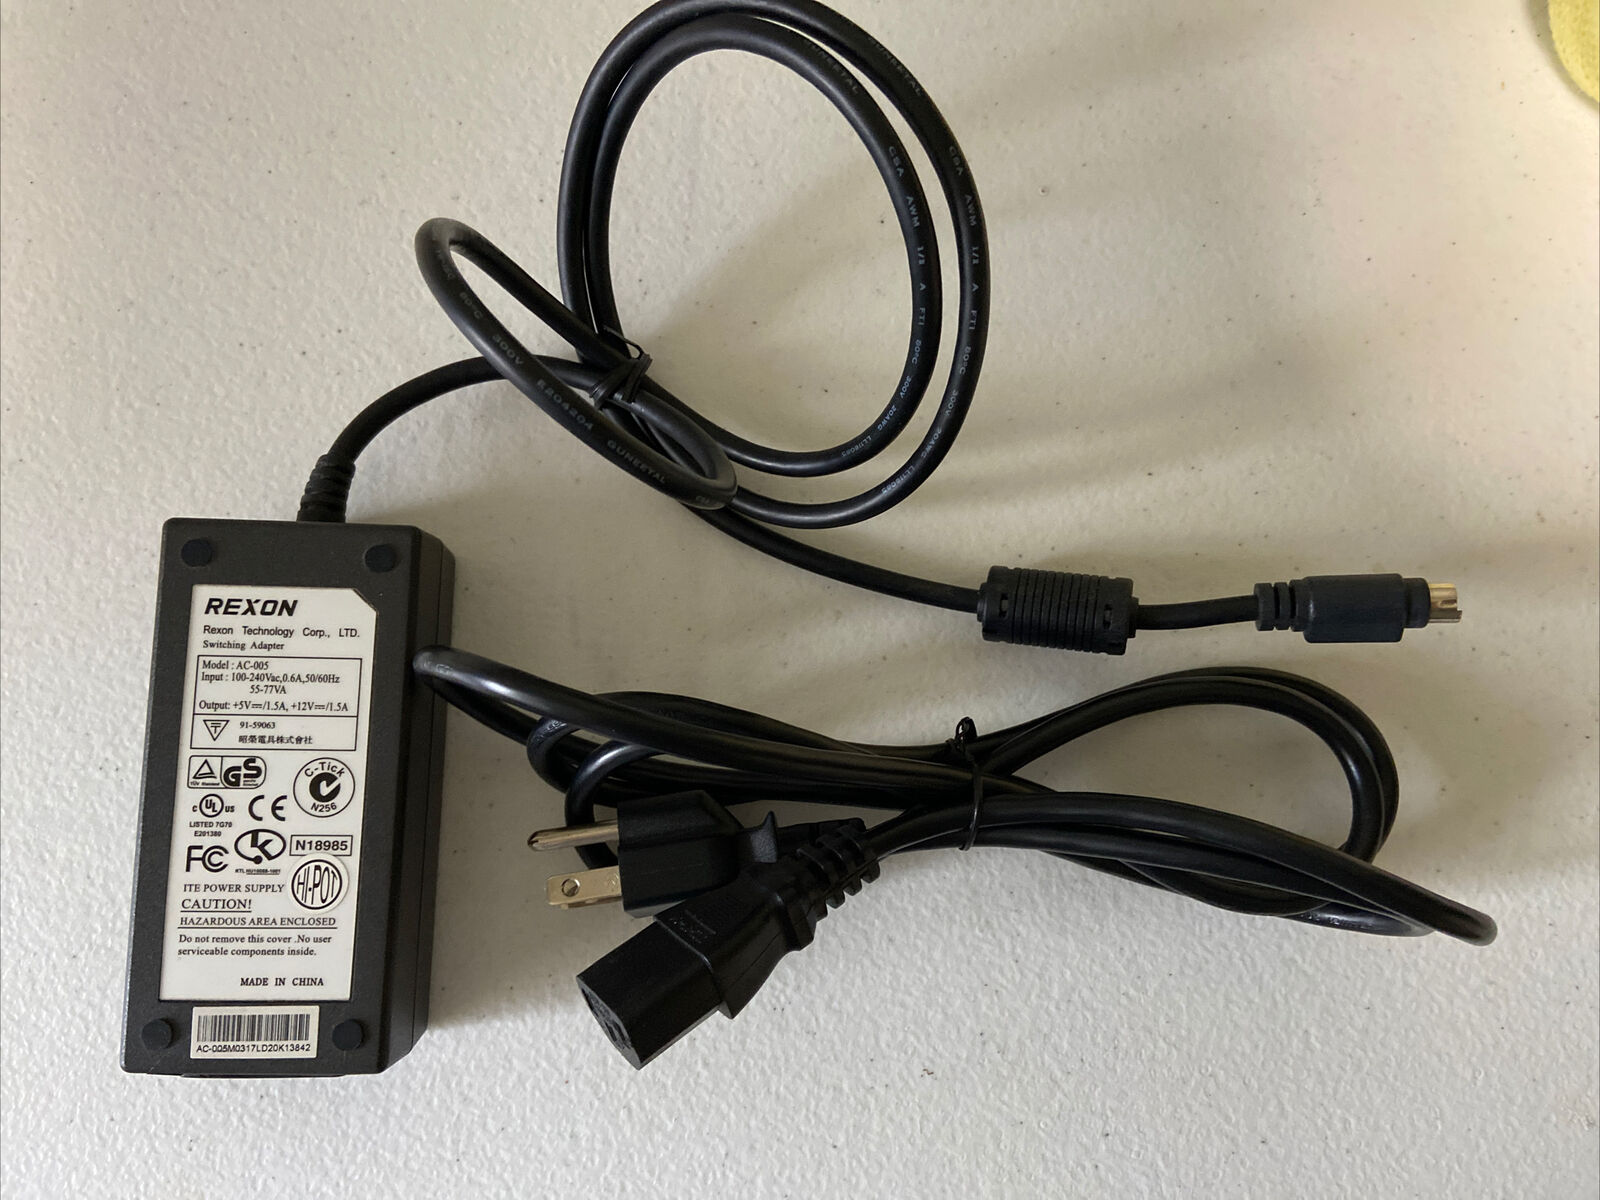 Rexon AC-005 Switching Adapter Output 5V 12V 1.5A Power Supply Transformer A6 Connection Split/Duplication: 1:2 Type: - Click Image to Close